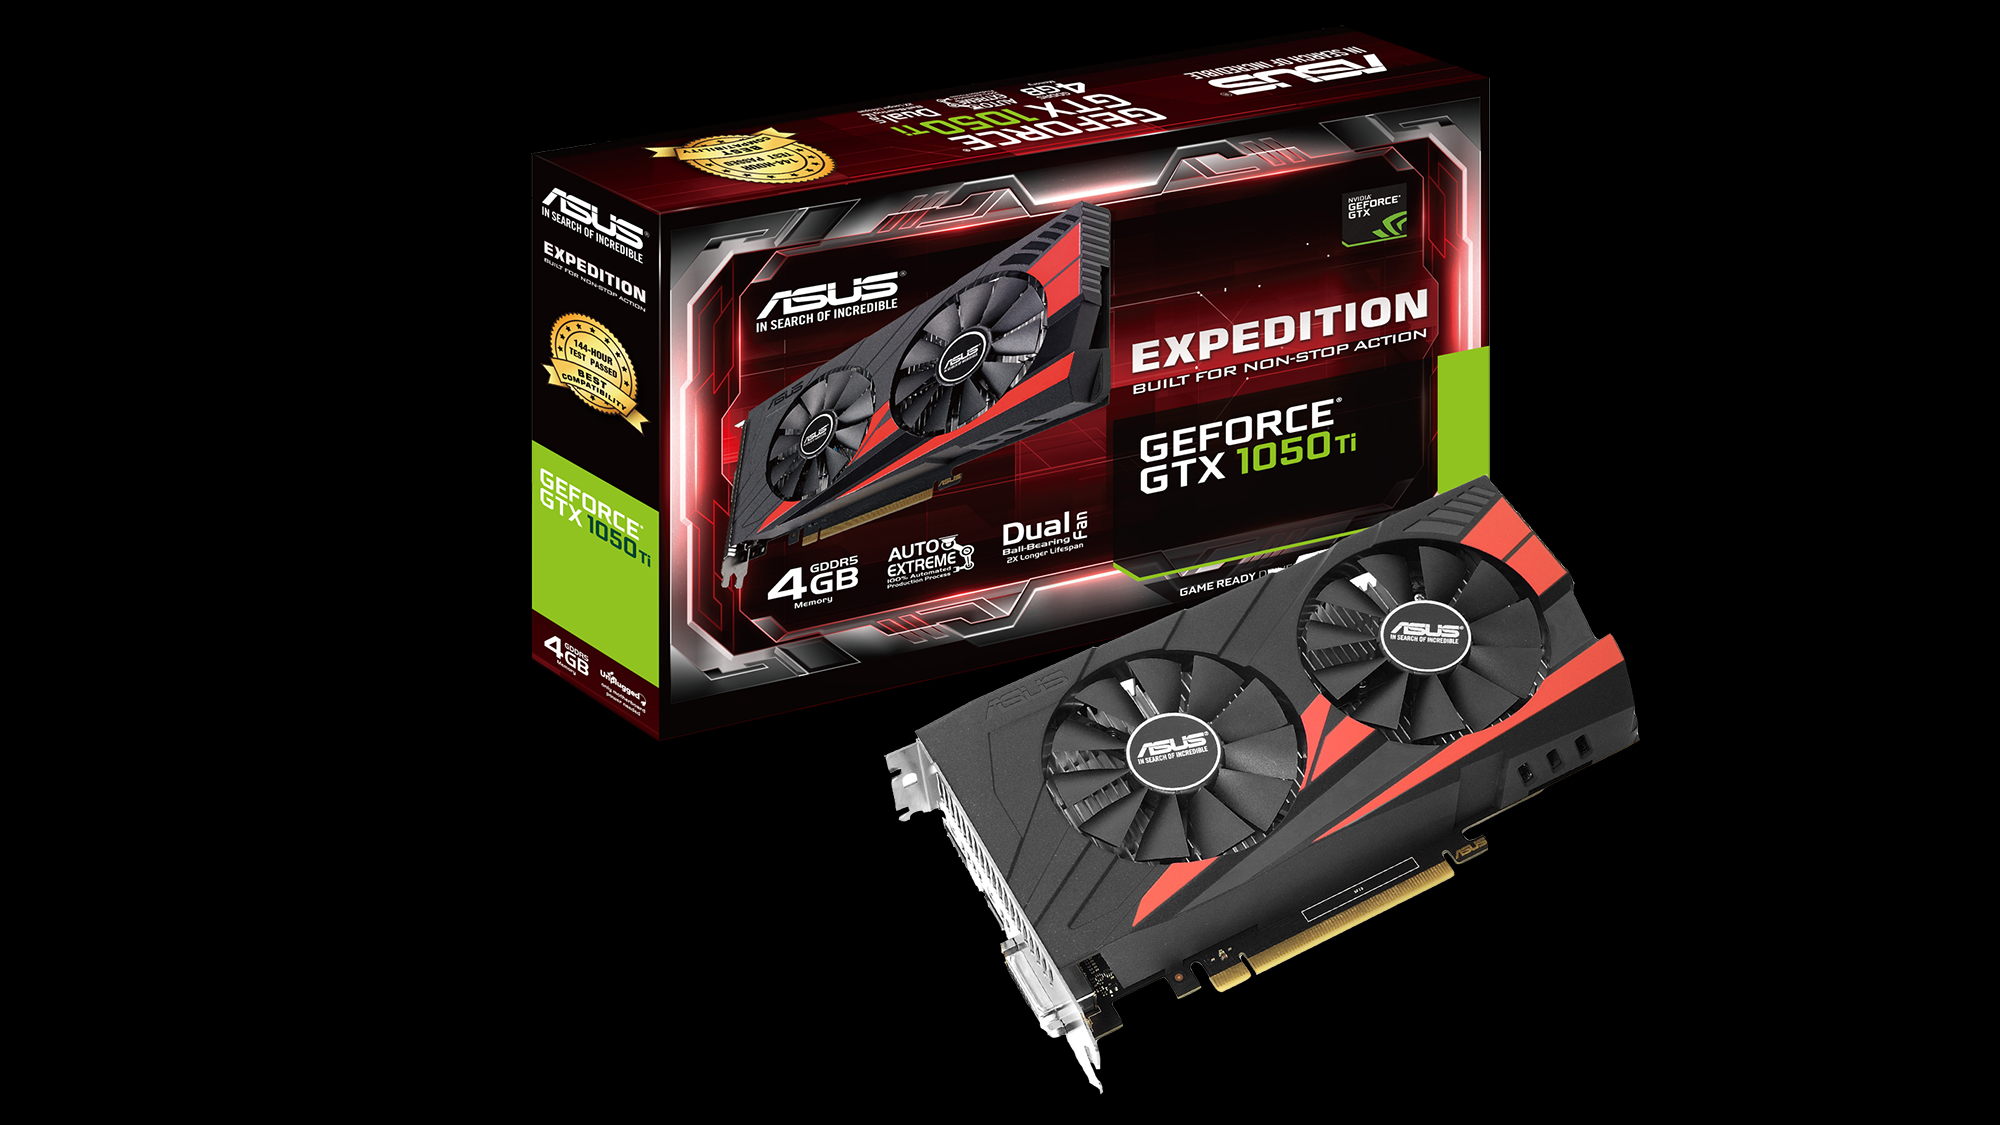 ASUS Announces Latest Line-Up of Graphics Cards Powered by NVIDIA